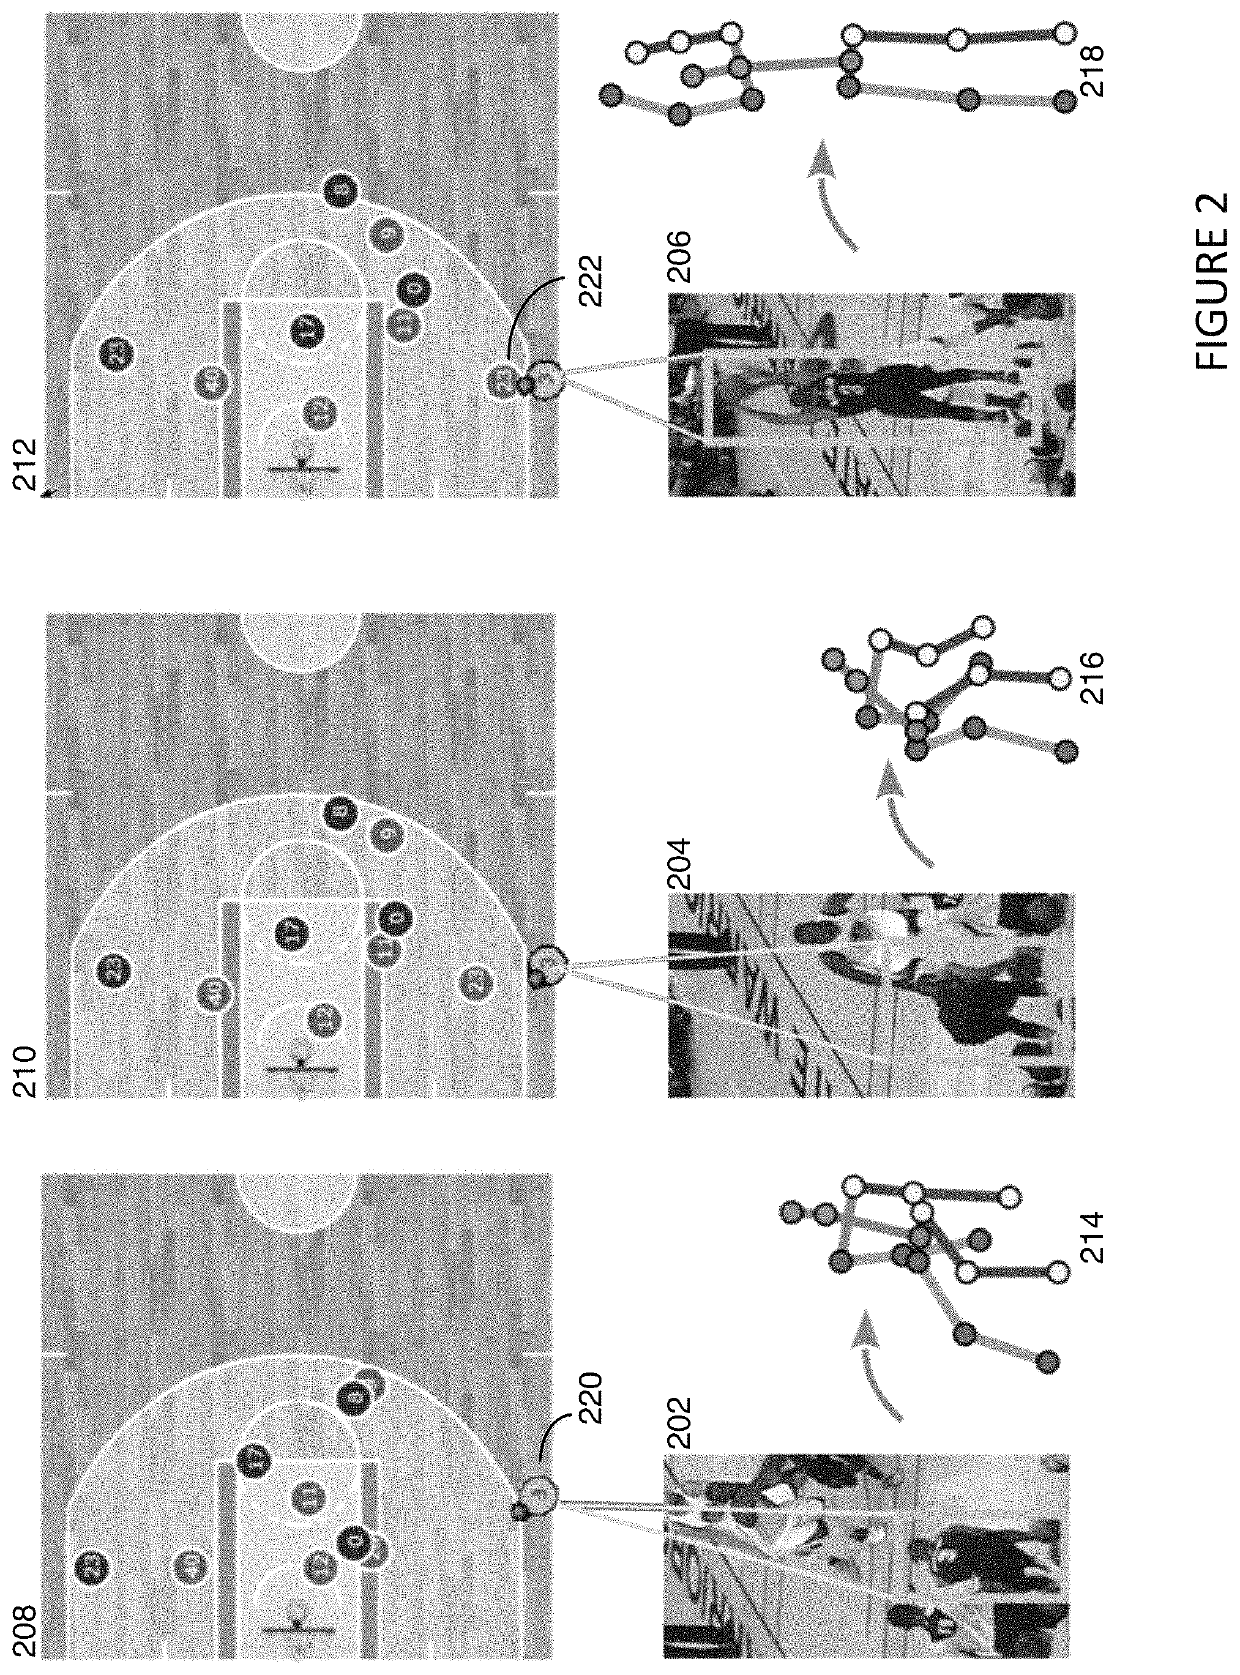 System and method for predictive sports analytics using body-pose information